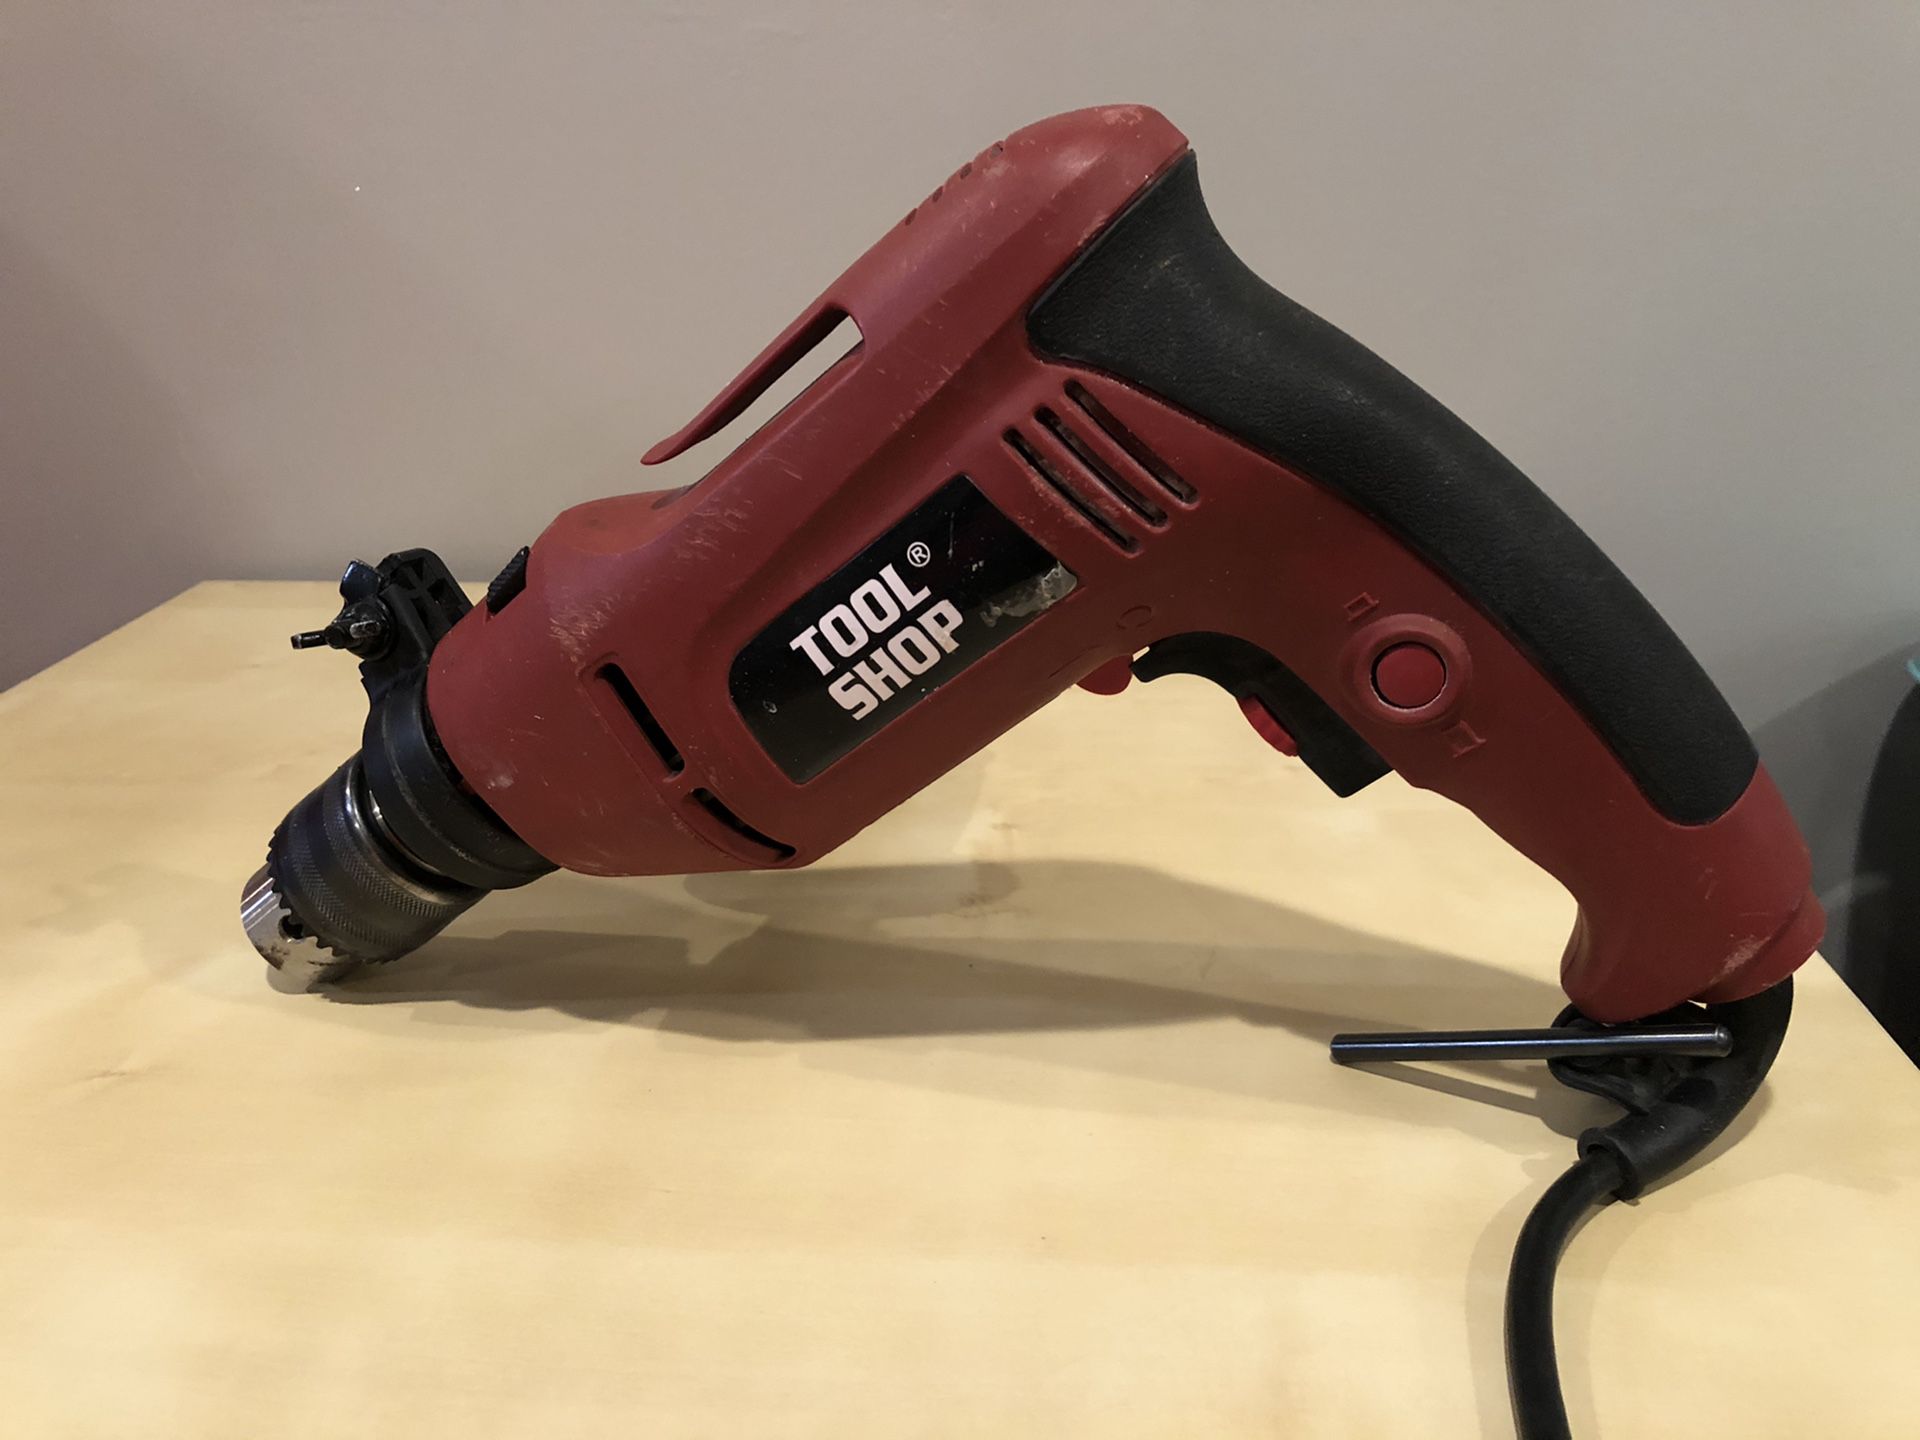 Tool Shop 1/2” Hammer Drill Electric